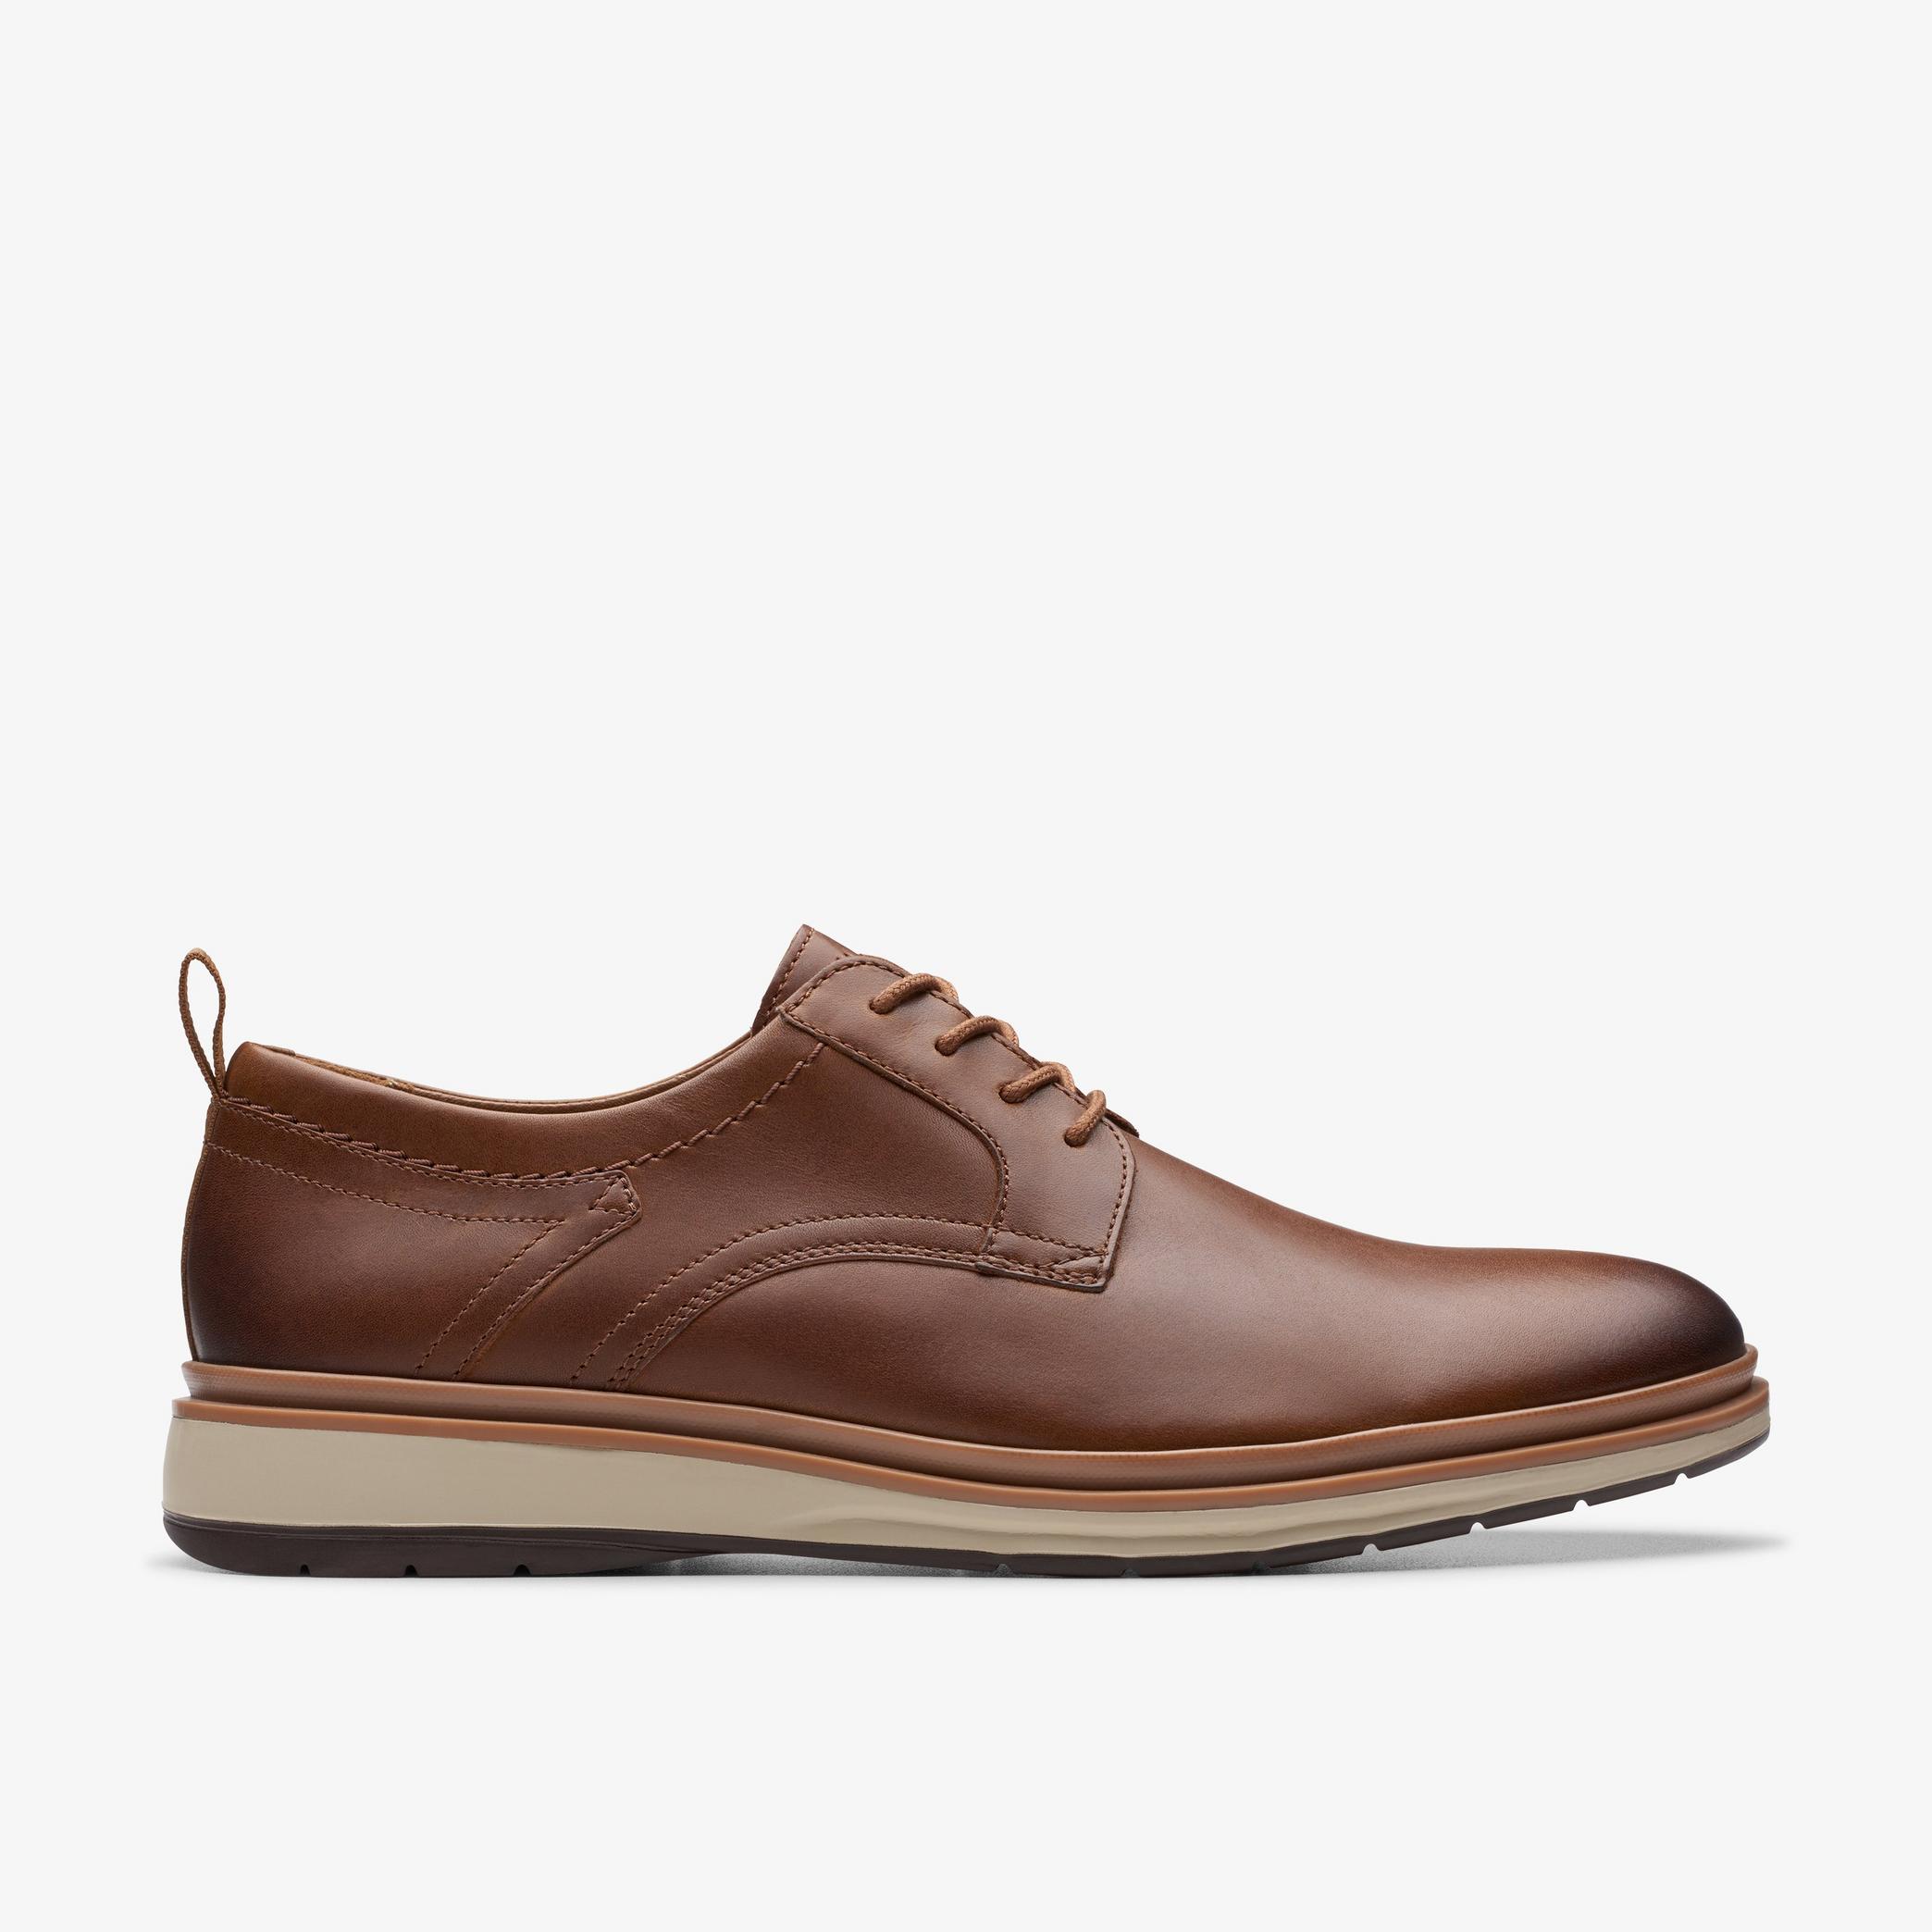 Chantry Lo Dark Tan Leather Oxford Shoes, view 1 of 6